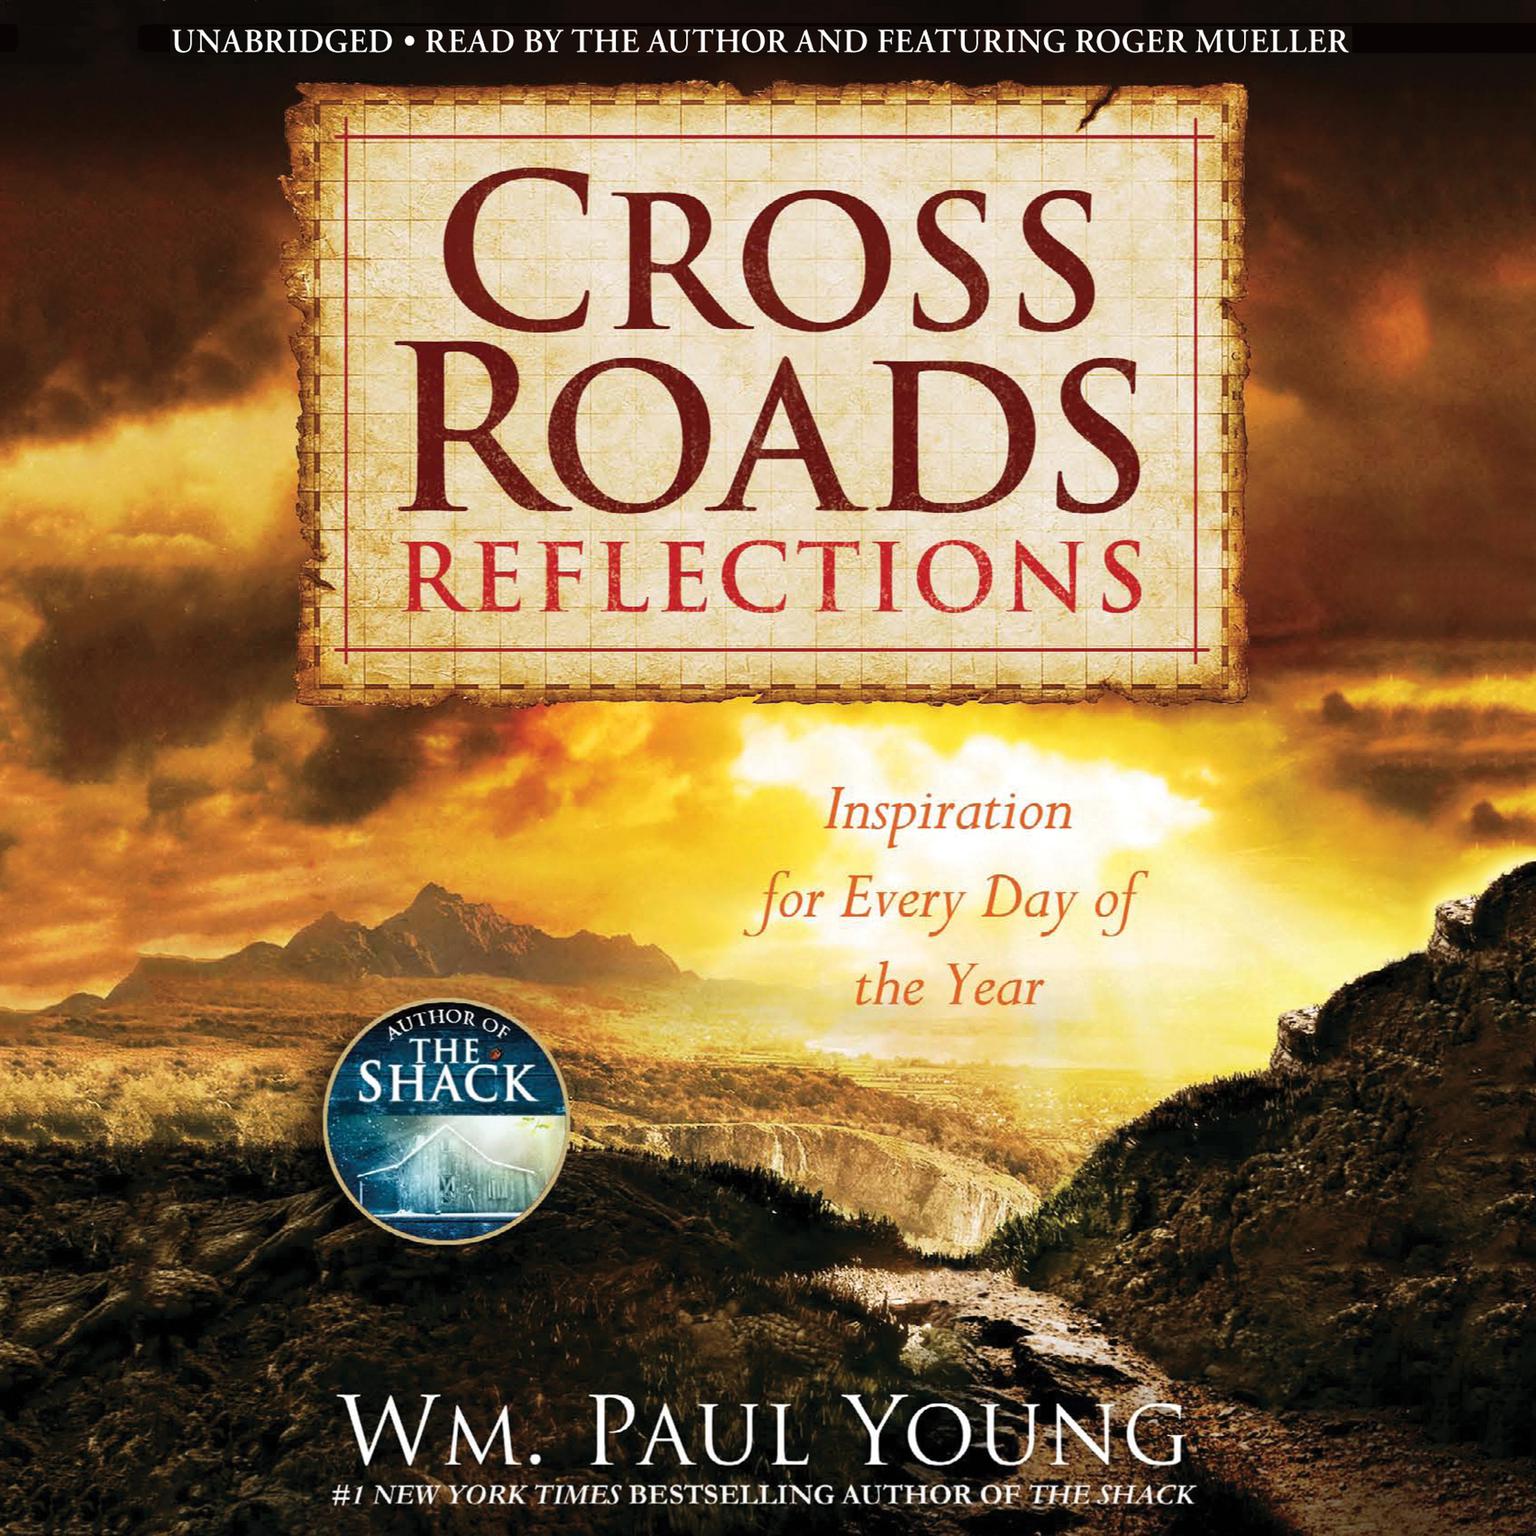 Cross Roads Reflections: Inspiration for Every Day of the Year Audiobook, by William Paul Young